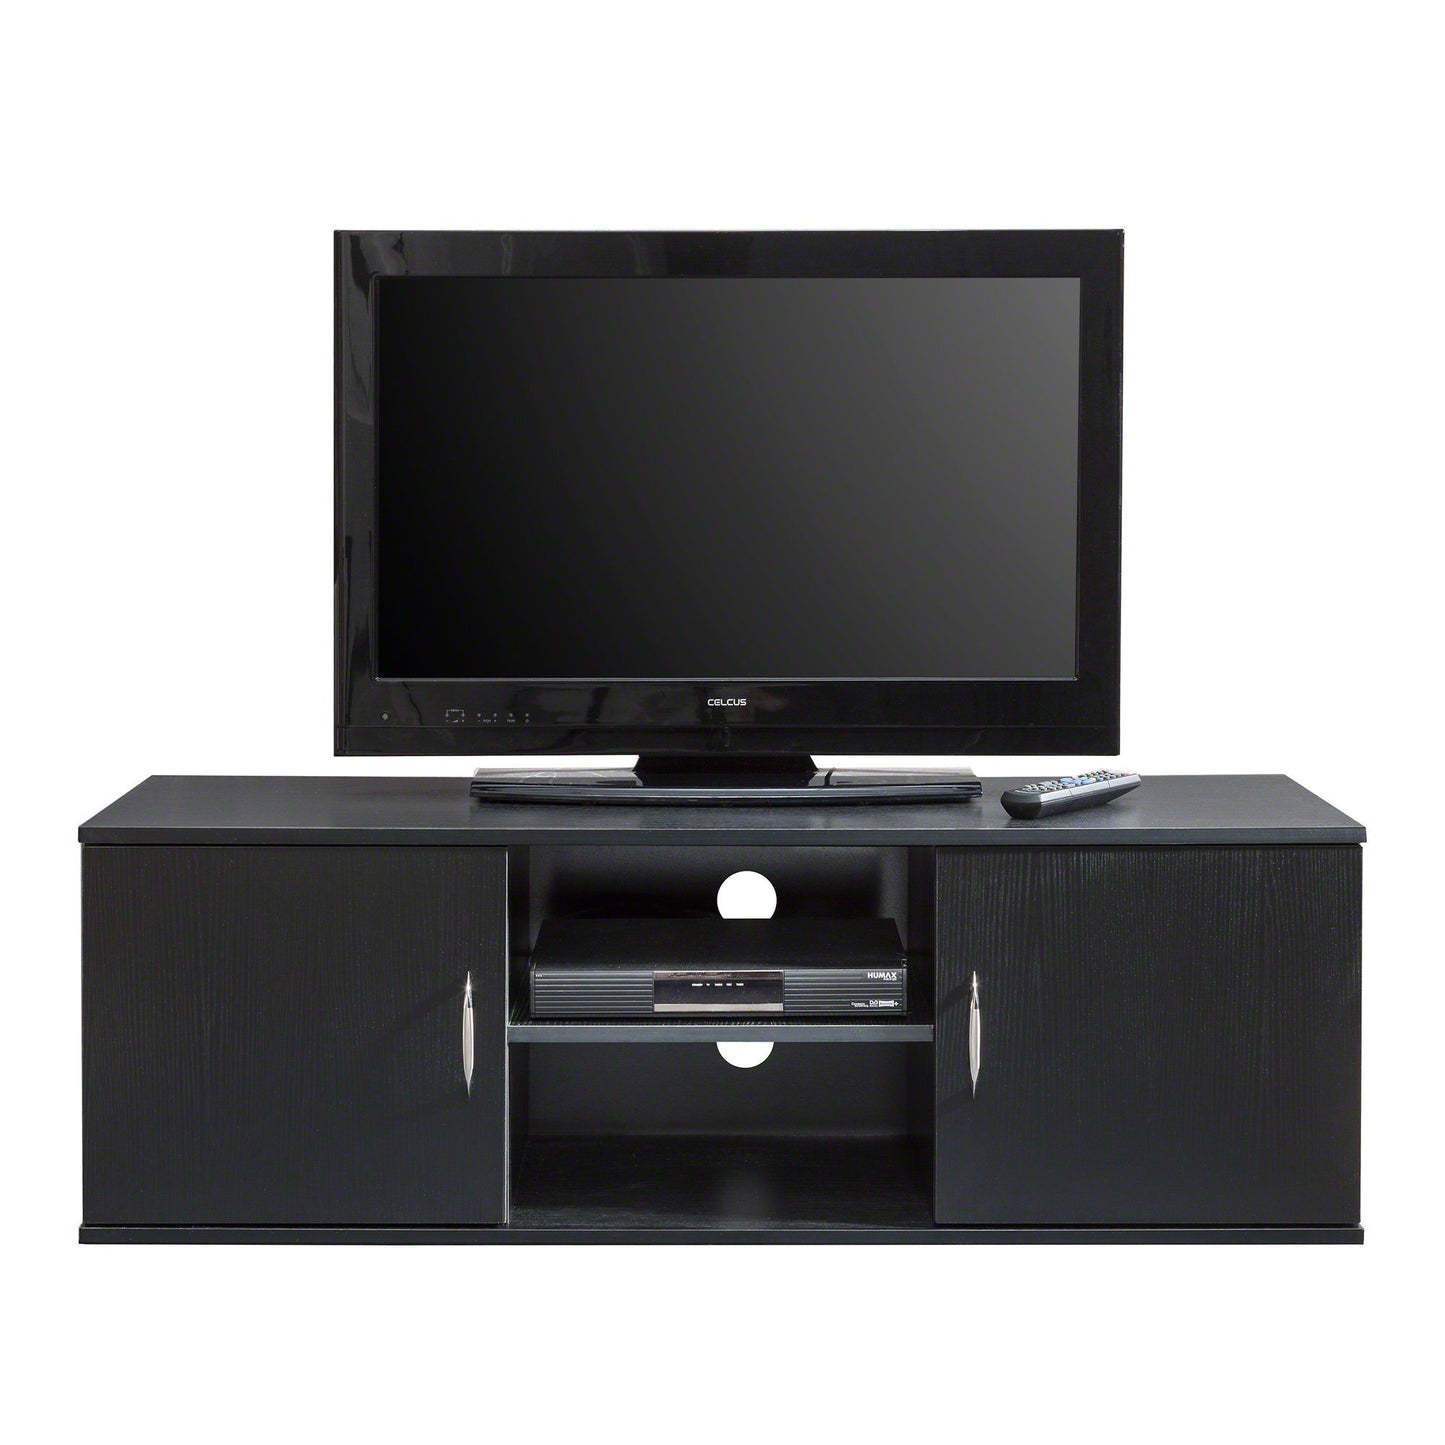 Black TV Unit with Storage and Shelf - Laura James - Laura James